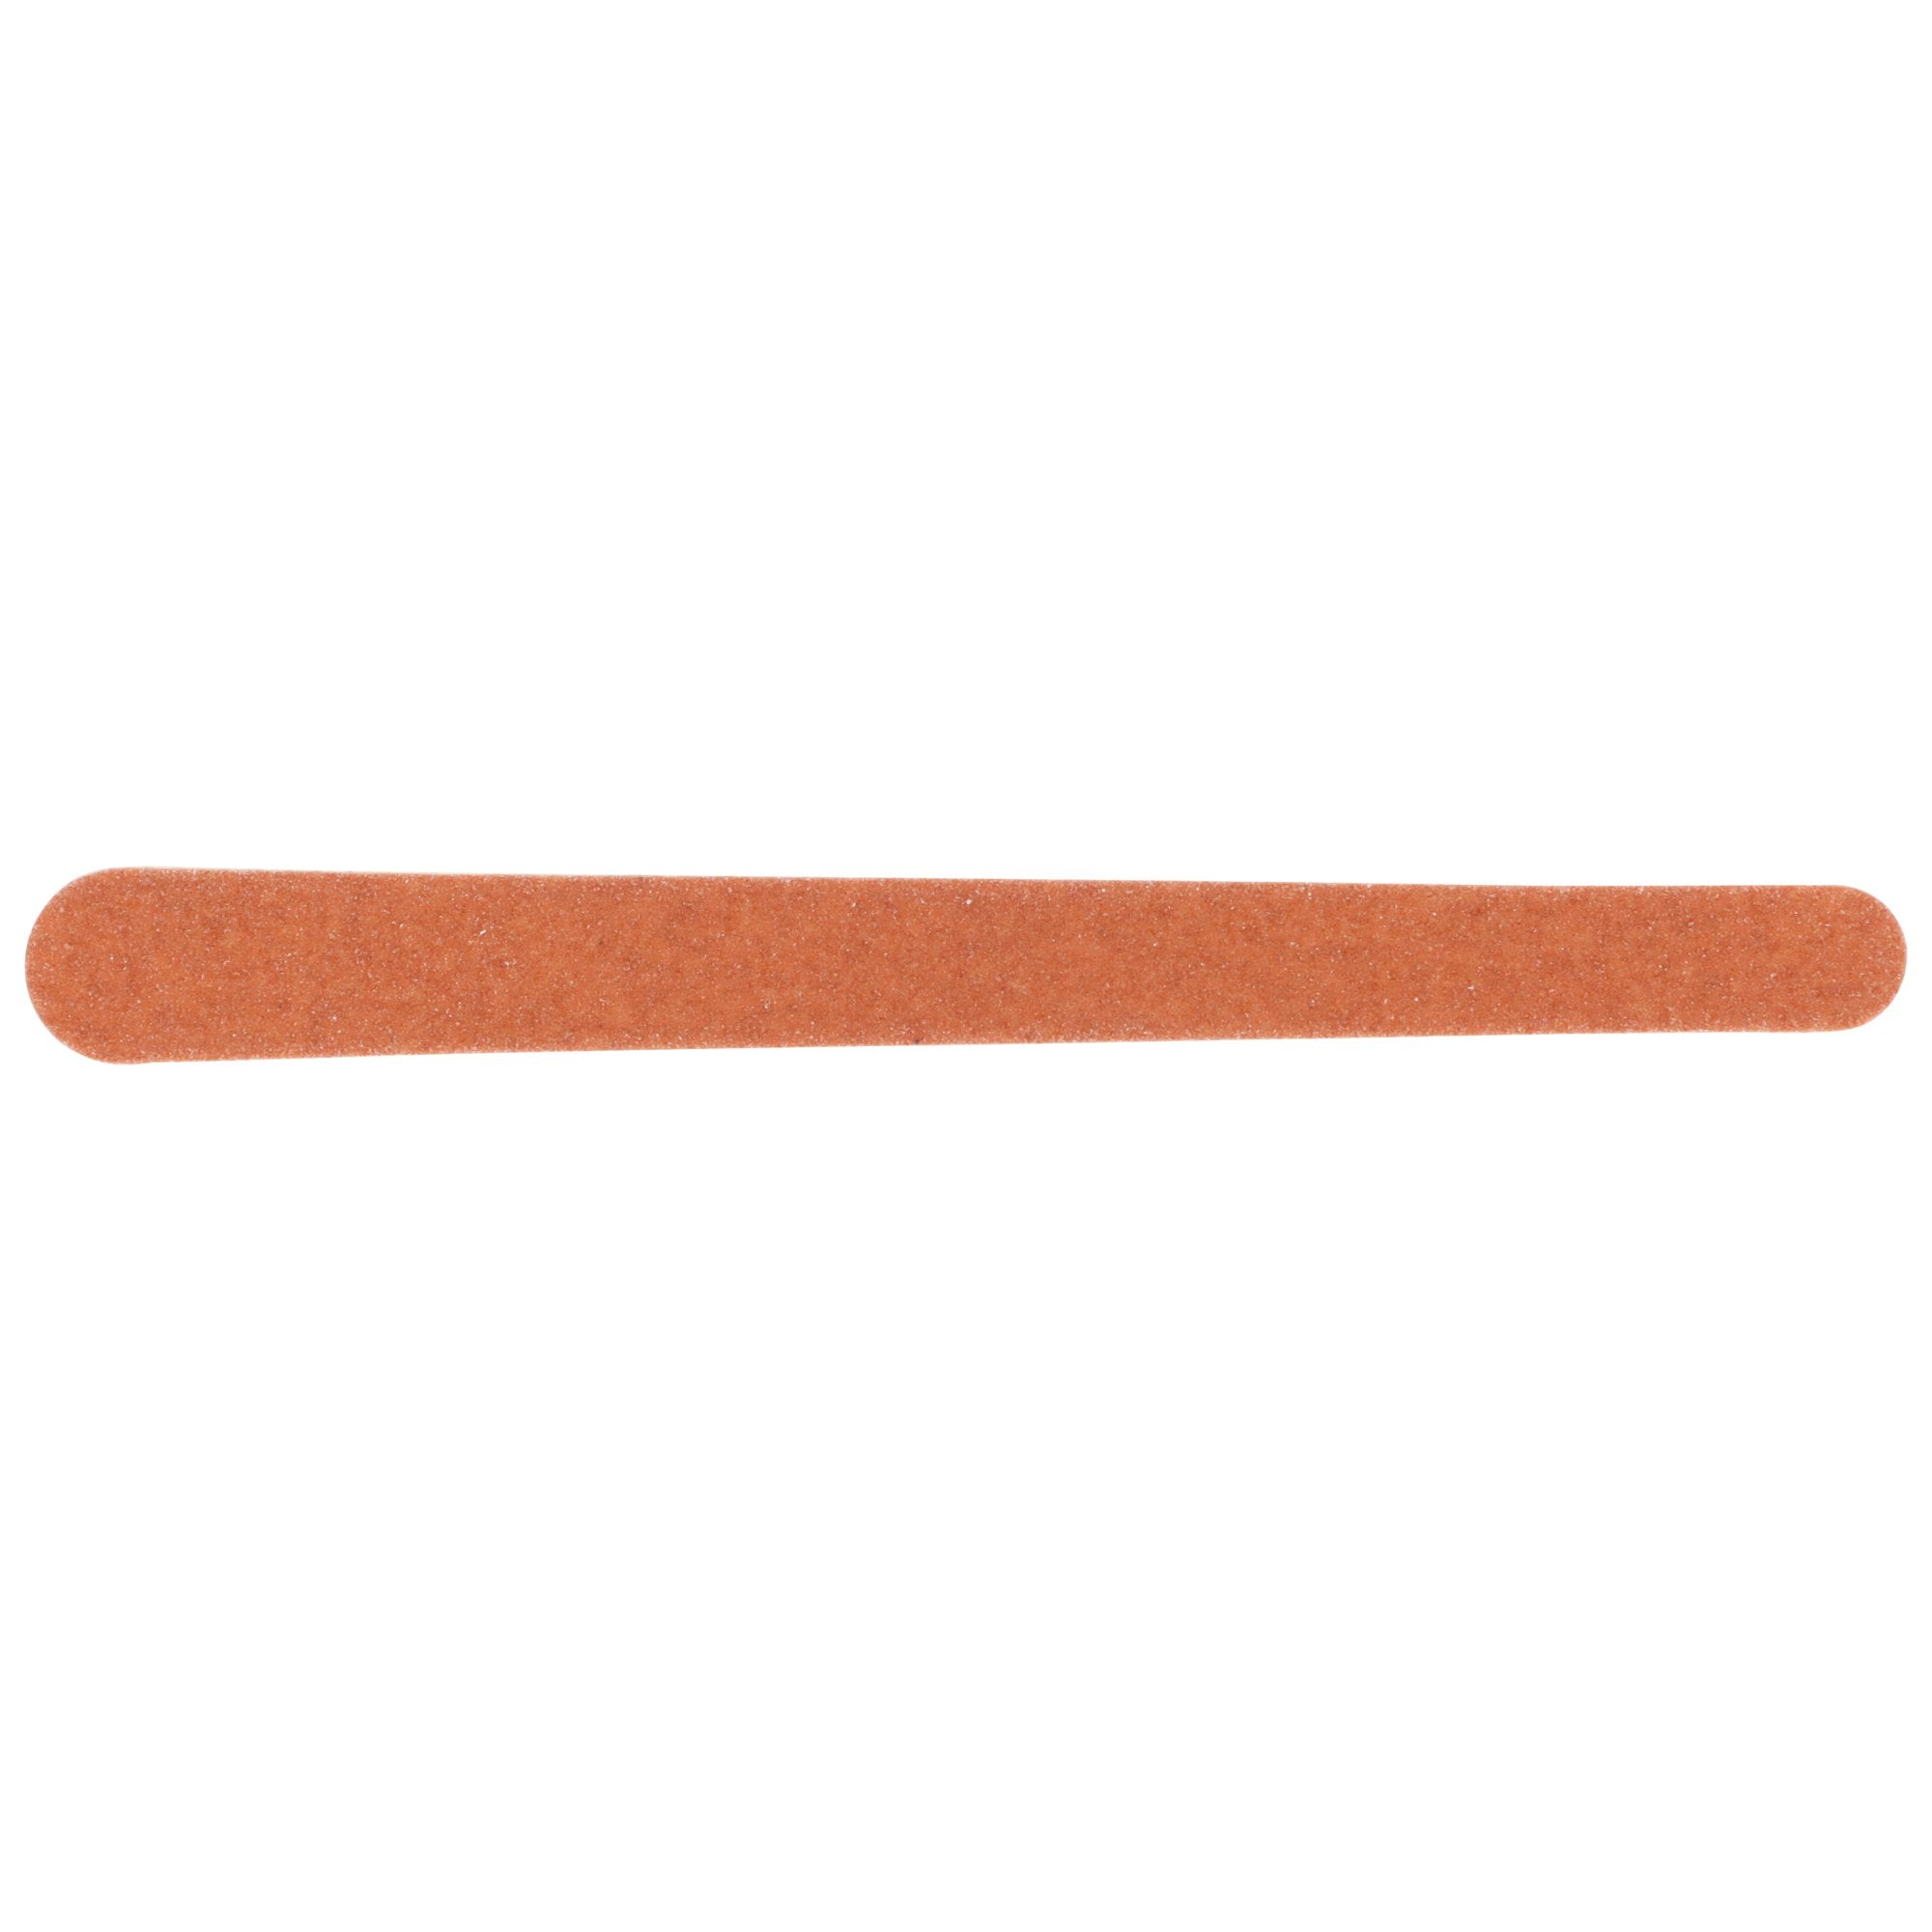 Personal Care>Nail Care>Emery Boards & Manicure Sticks - McKesson - Wasatch Medical Supply